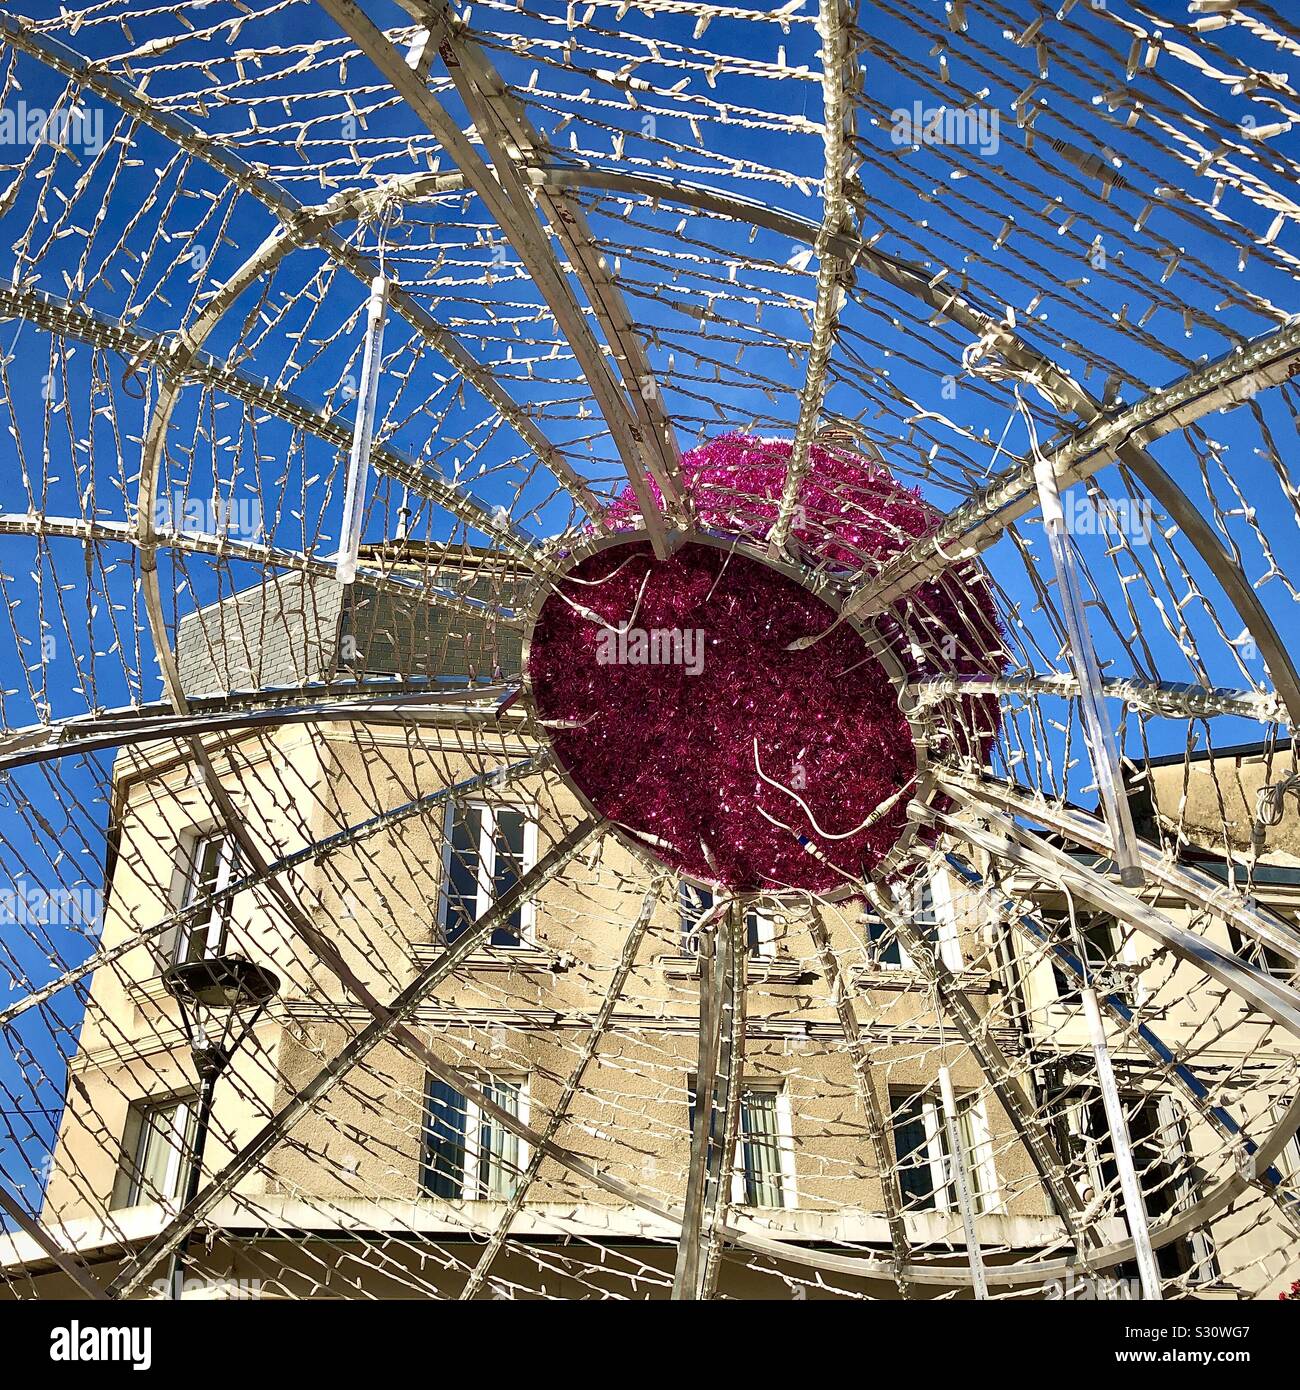 View from underneath large Christmas bauble in city center - Chatellerault, Vienne, France. Stock Photo